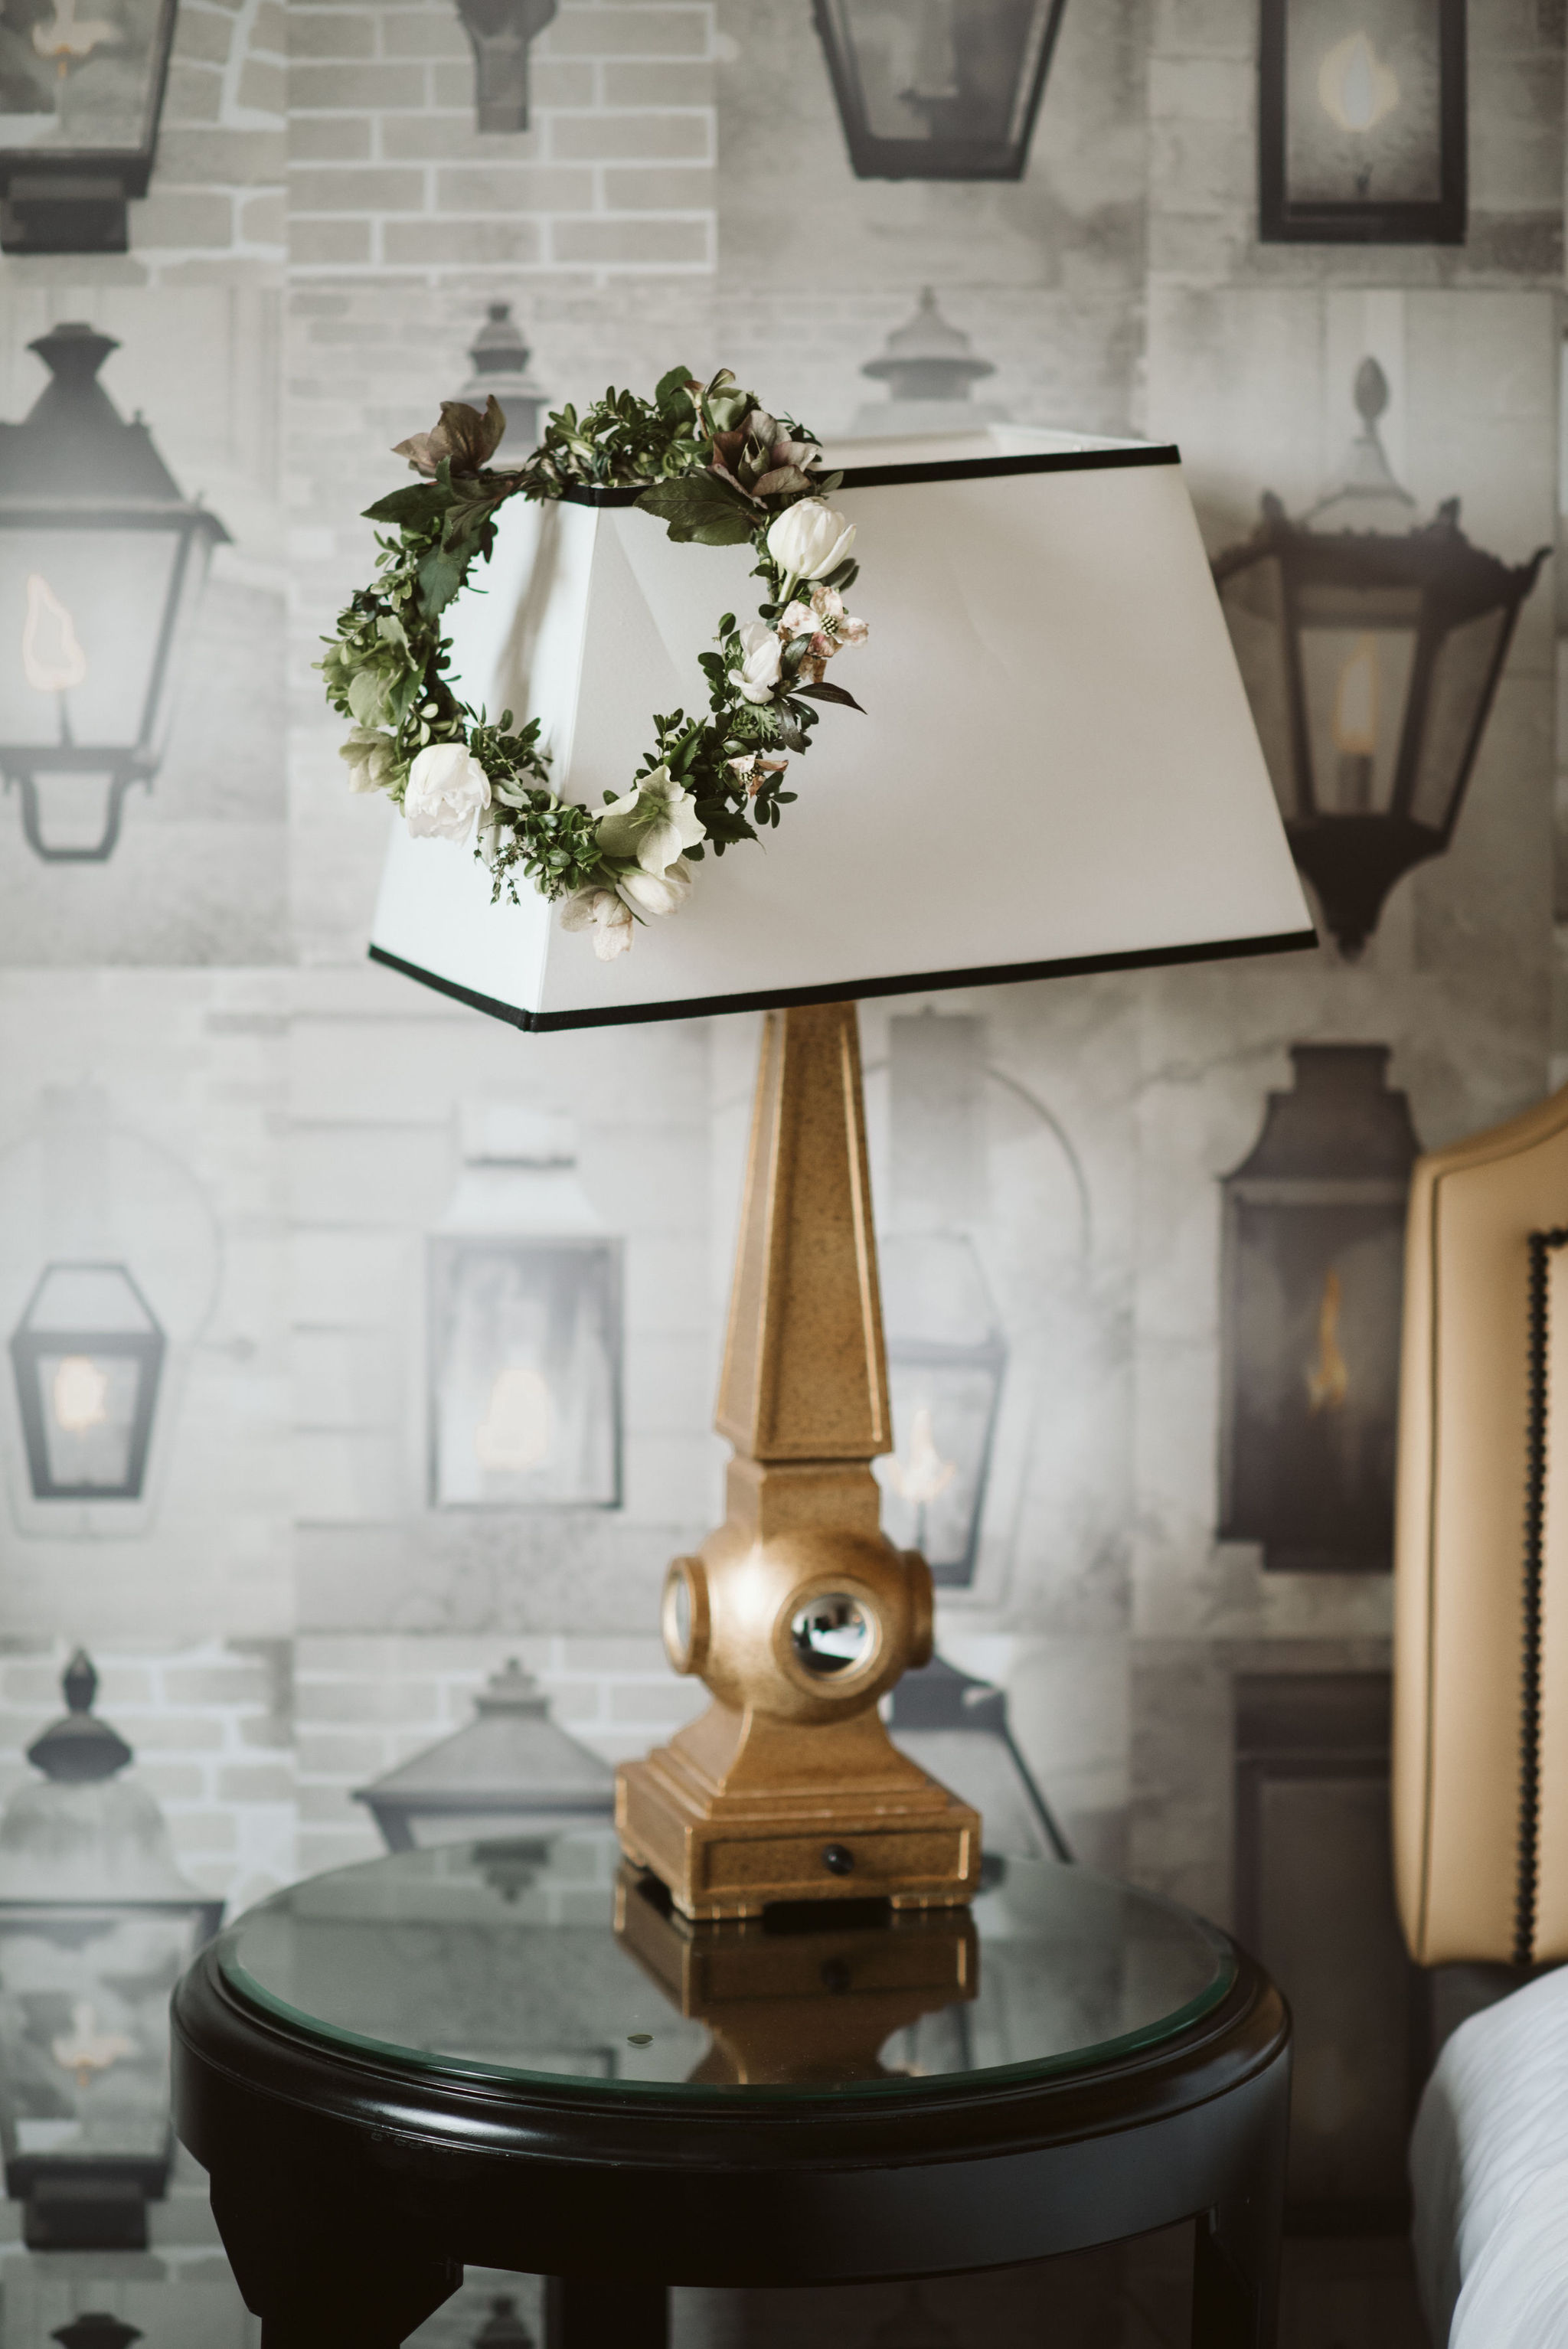  Washington DC, Baltimore Wedding Photographer, Alexandria, Old Town, Jewel Tone, Romantic, Modern, The Alexandrian Autograph Collection Hotel, Flower crown resting on lamp shade, White roses and poppies 